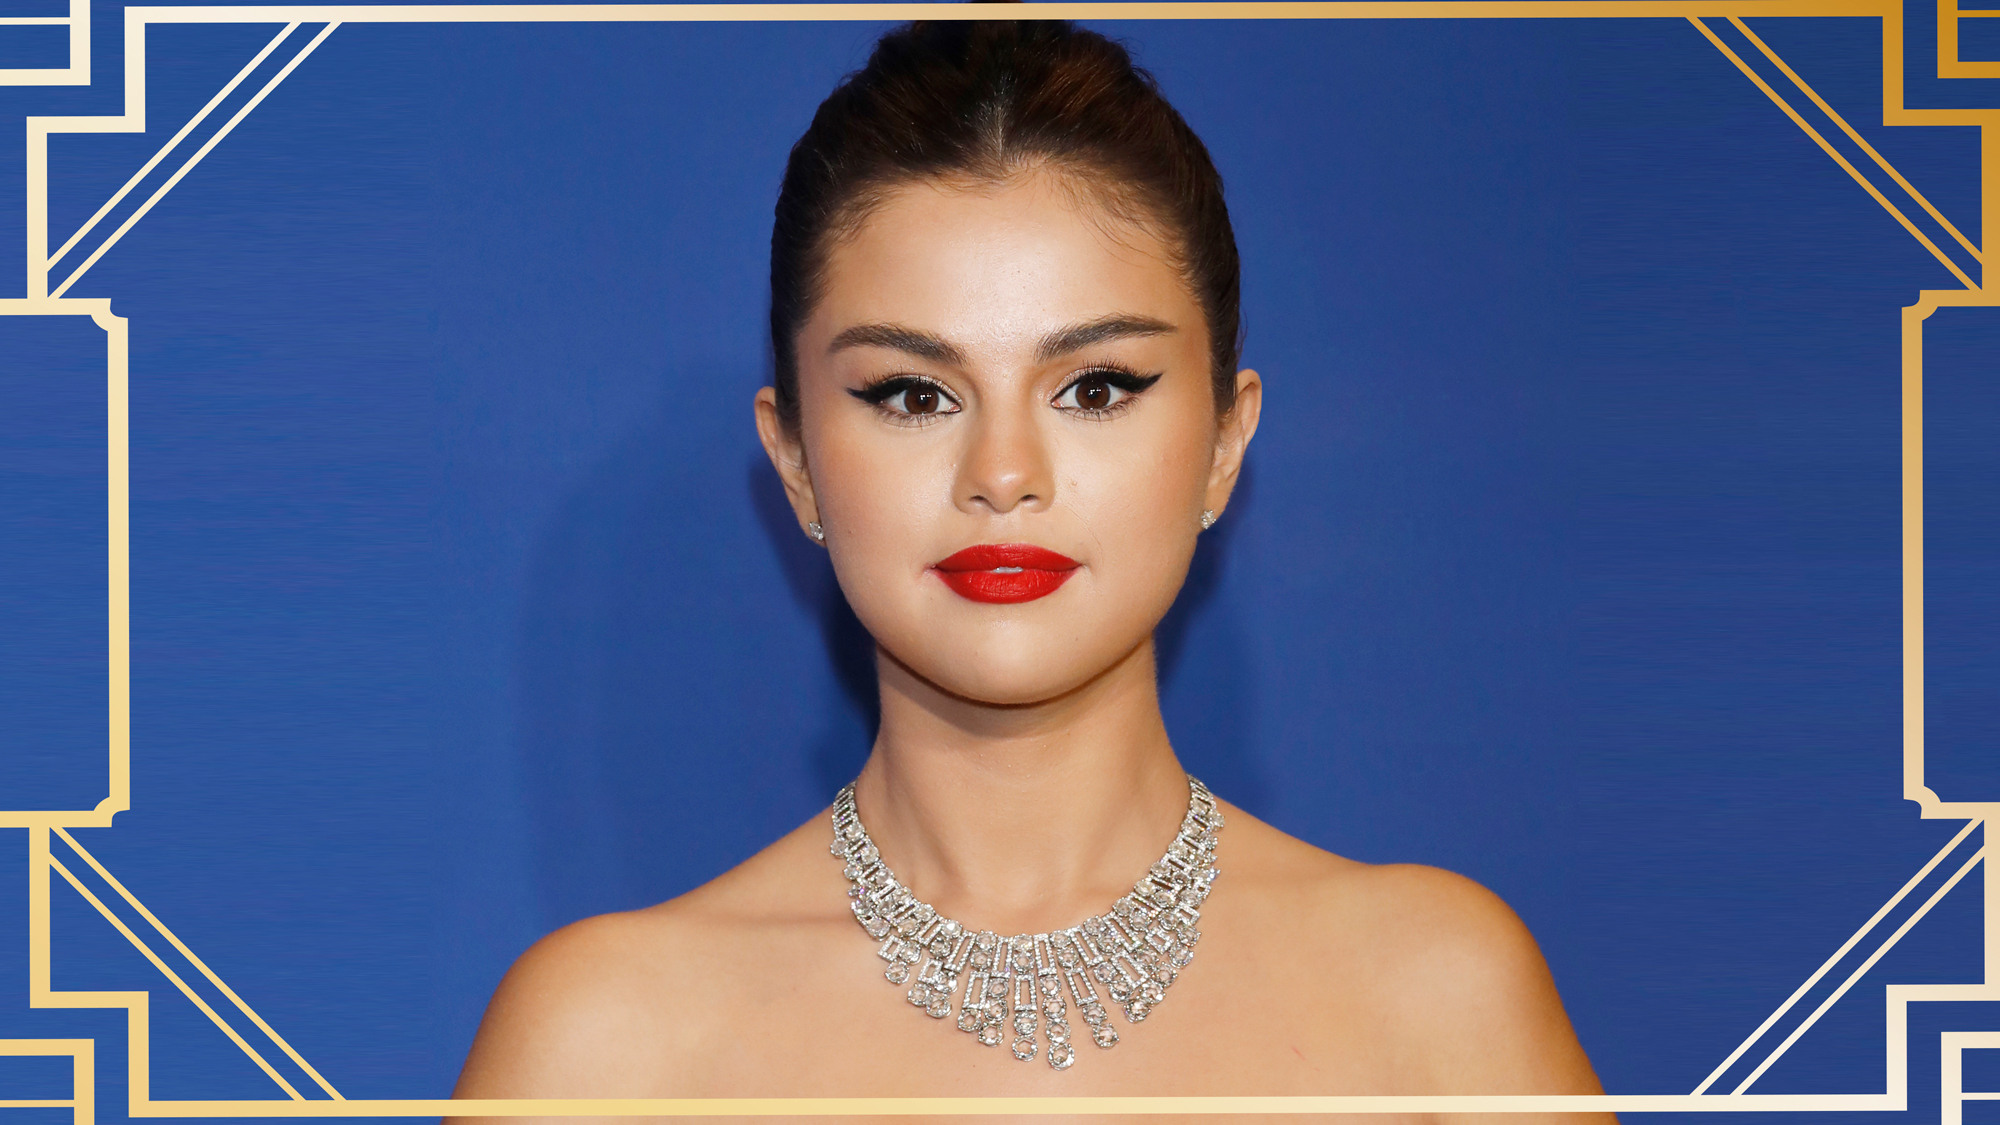 Selena Gomez at Cannes Film Festival 2019 adorned with Art Deco-inspired Jewellery